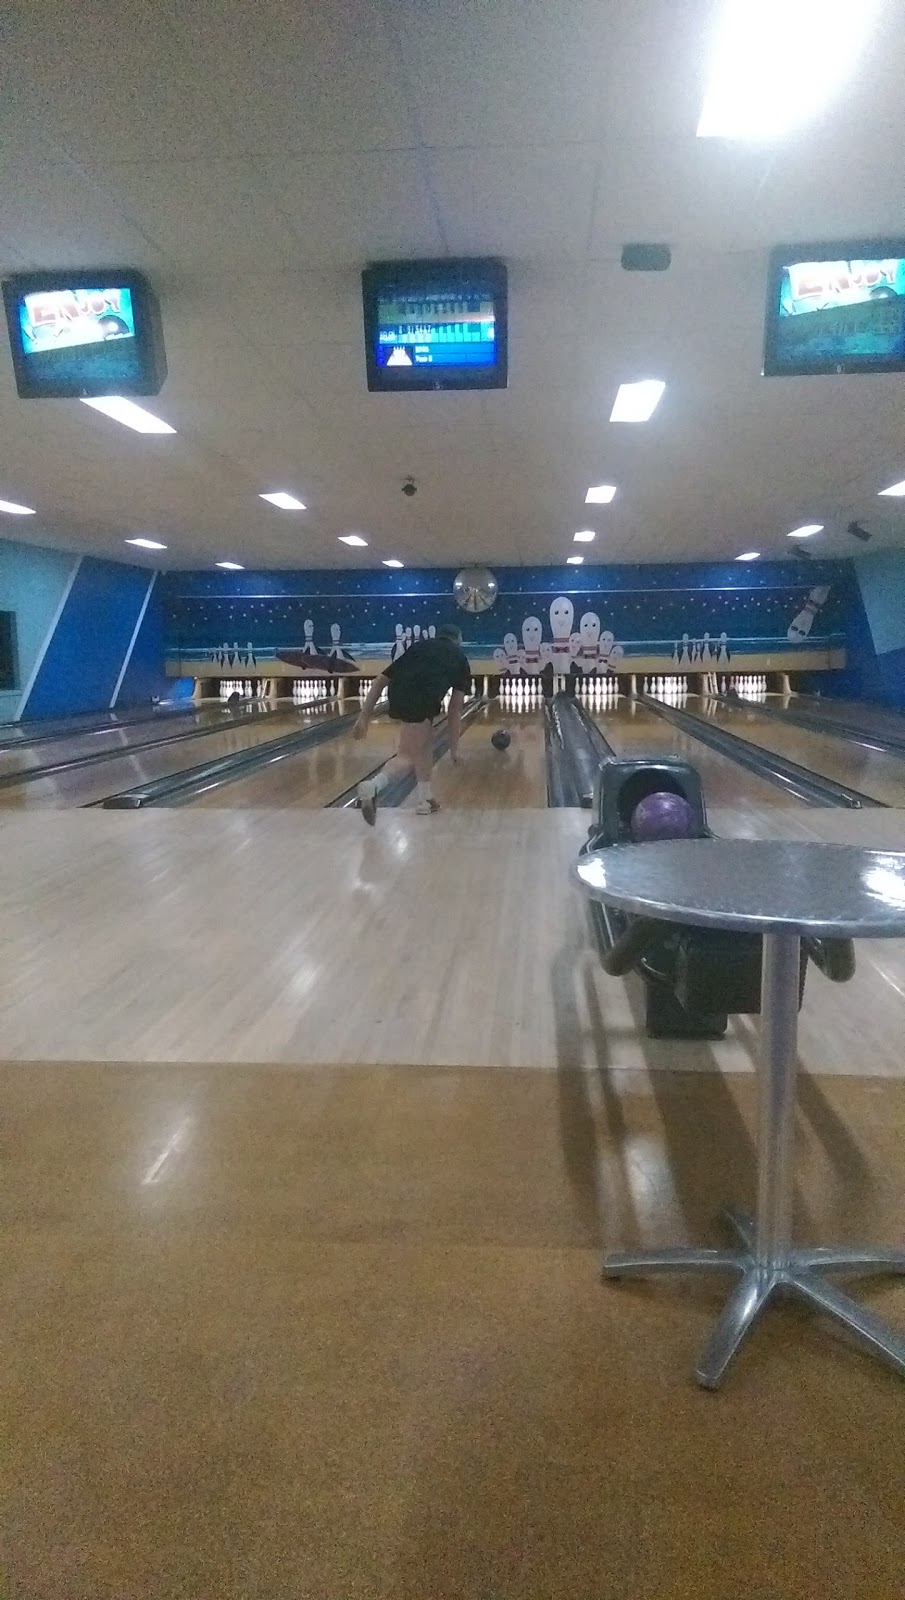 Phillip Island Ten Pin Bowling and Entertainment | bowling alley | 91-97 Settlement Rd, Cowes VIC 3922, Australia | 0359523977 OR +61 3 5952 3977